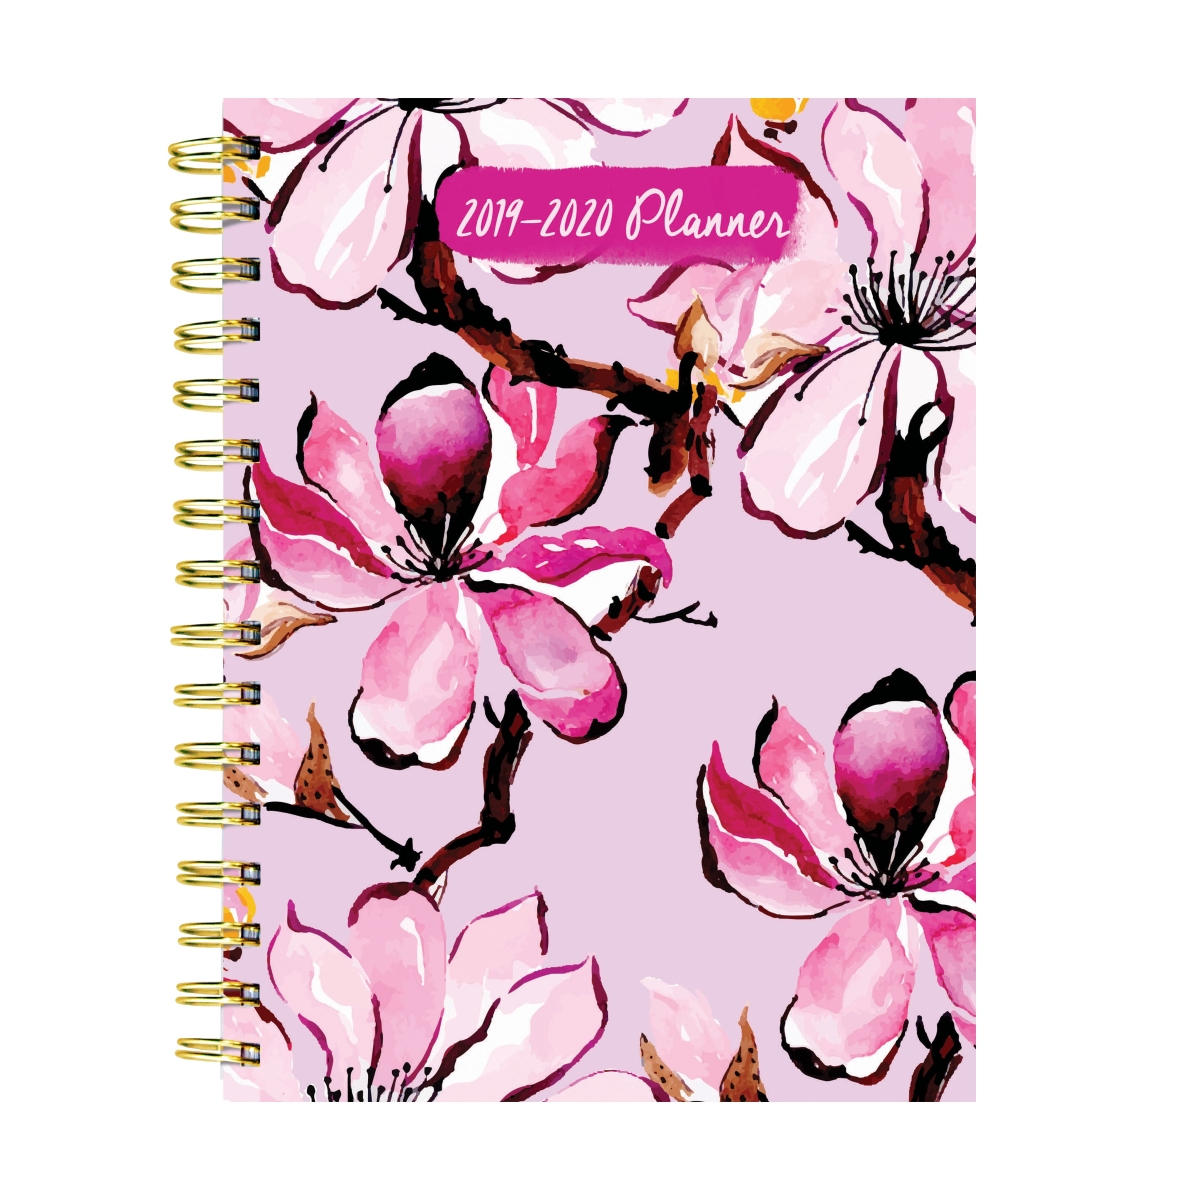 20-9225a July 2019 - June 2020 Pink Petals Medium Daily Weekly Monthly Planner